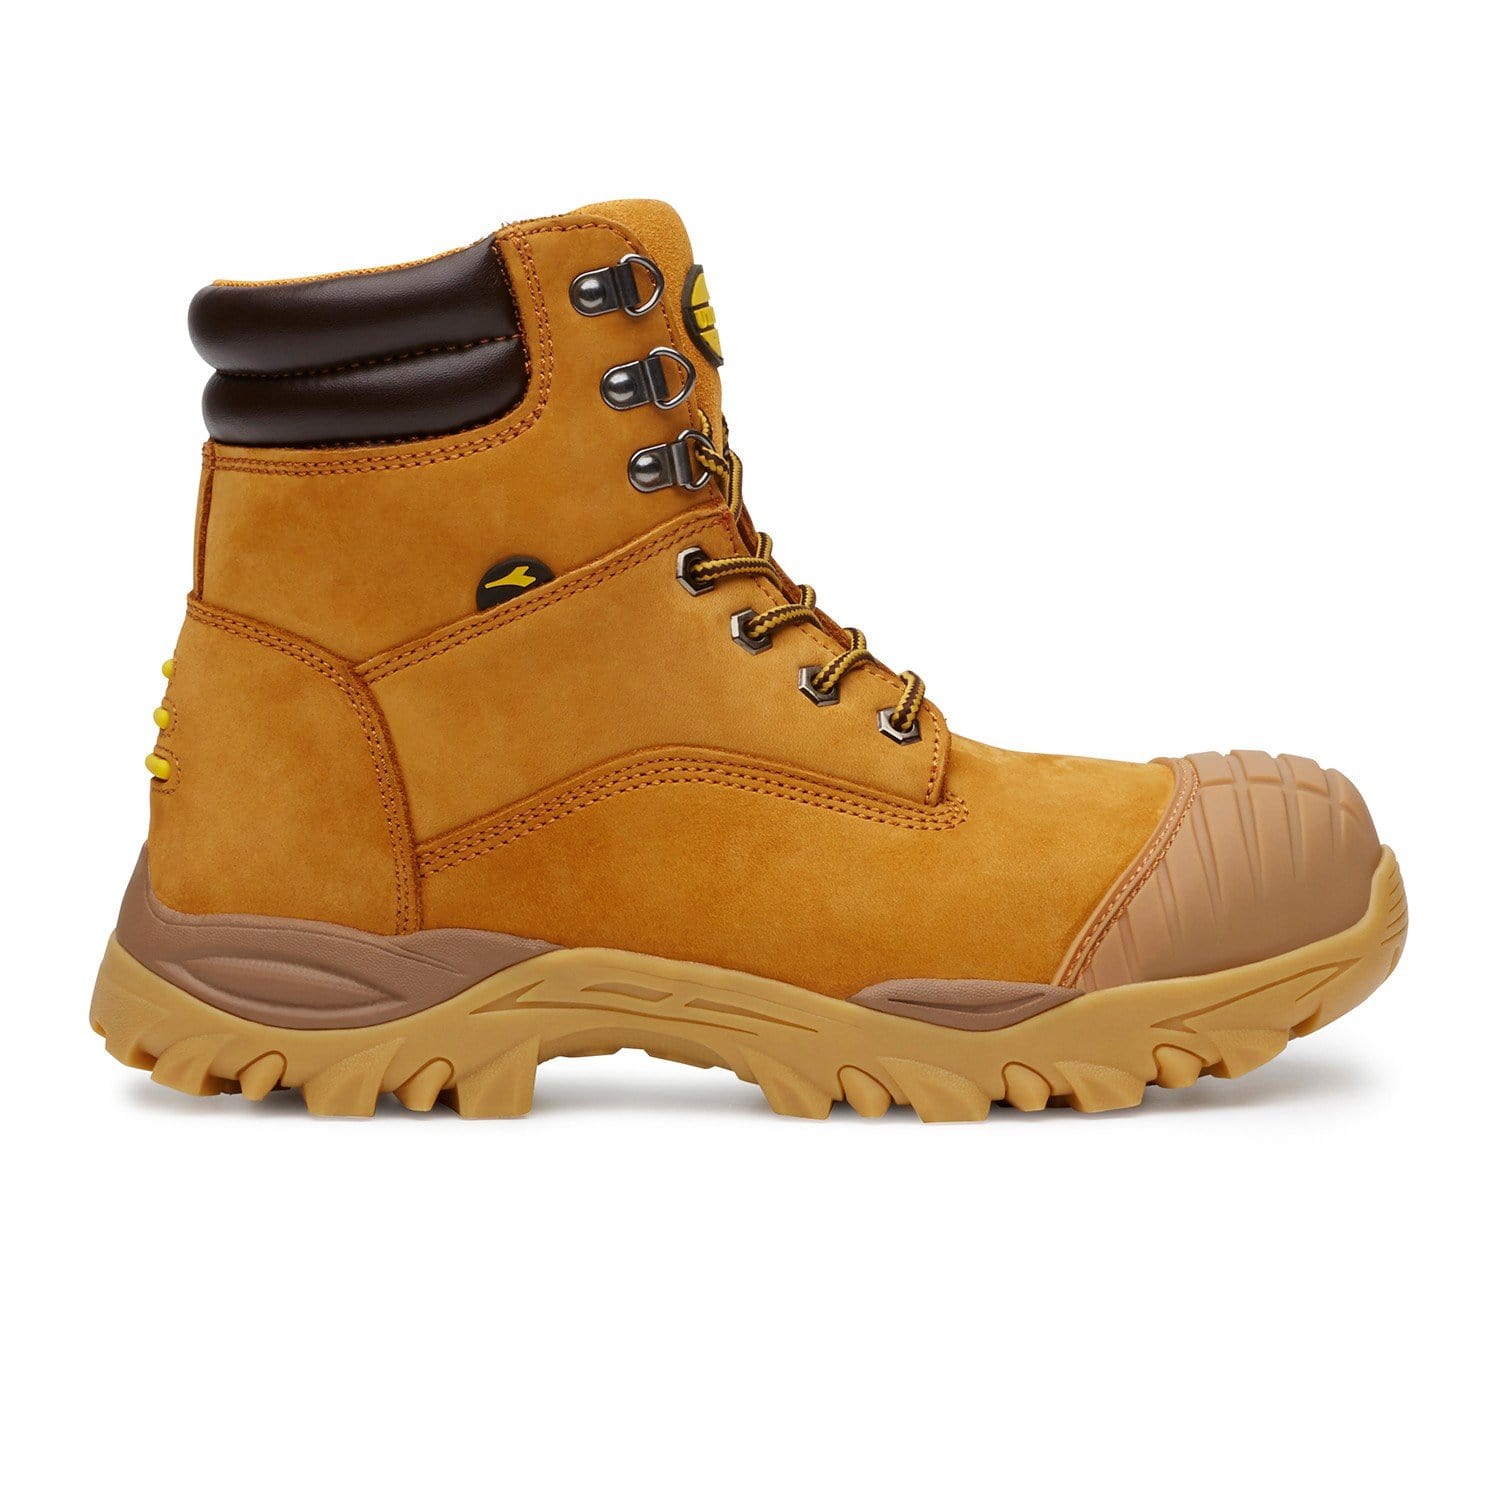 wheat craze lace up work boots